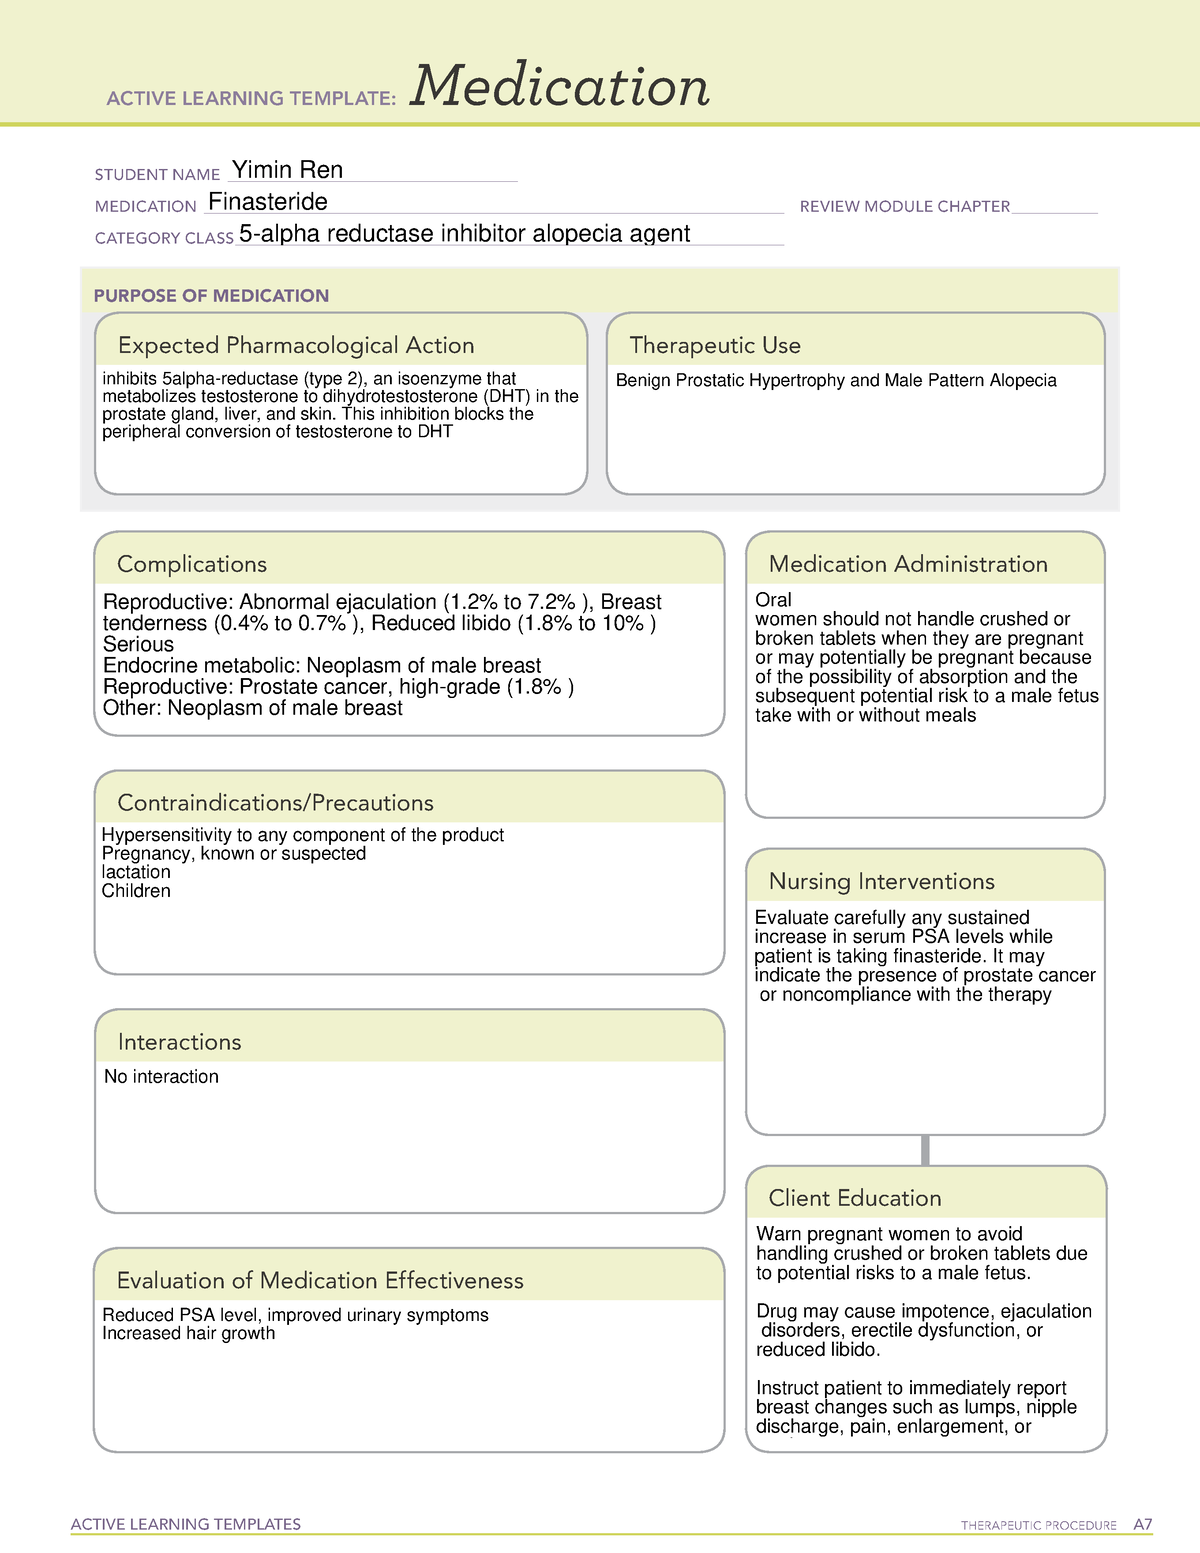 finasteride-active-learning-template-for-pharmacology-active-learning